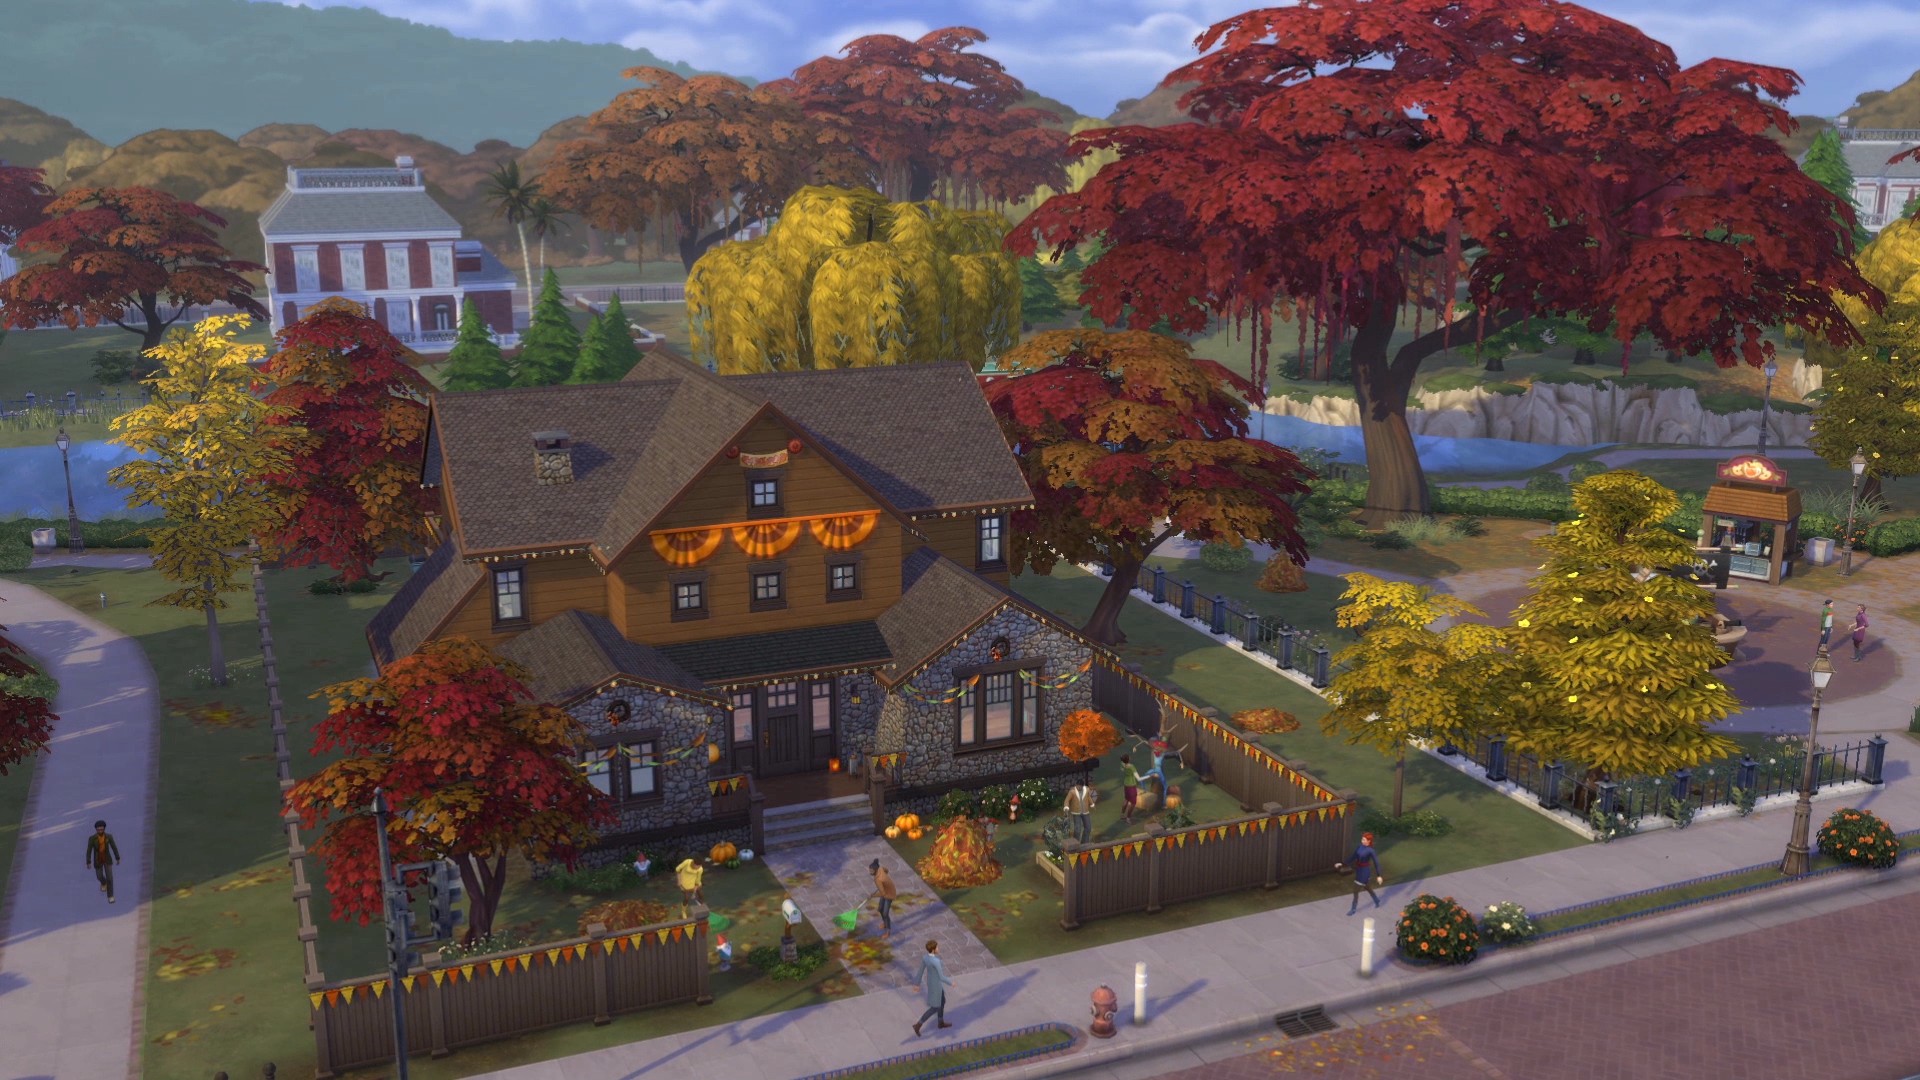 The Sims 4 Seasons Launches on Xbox One Just in Time for the Holidays